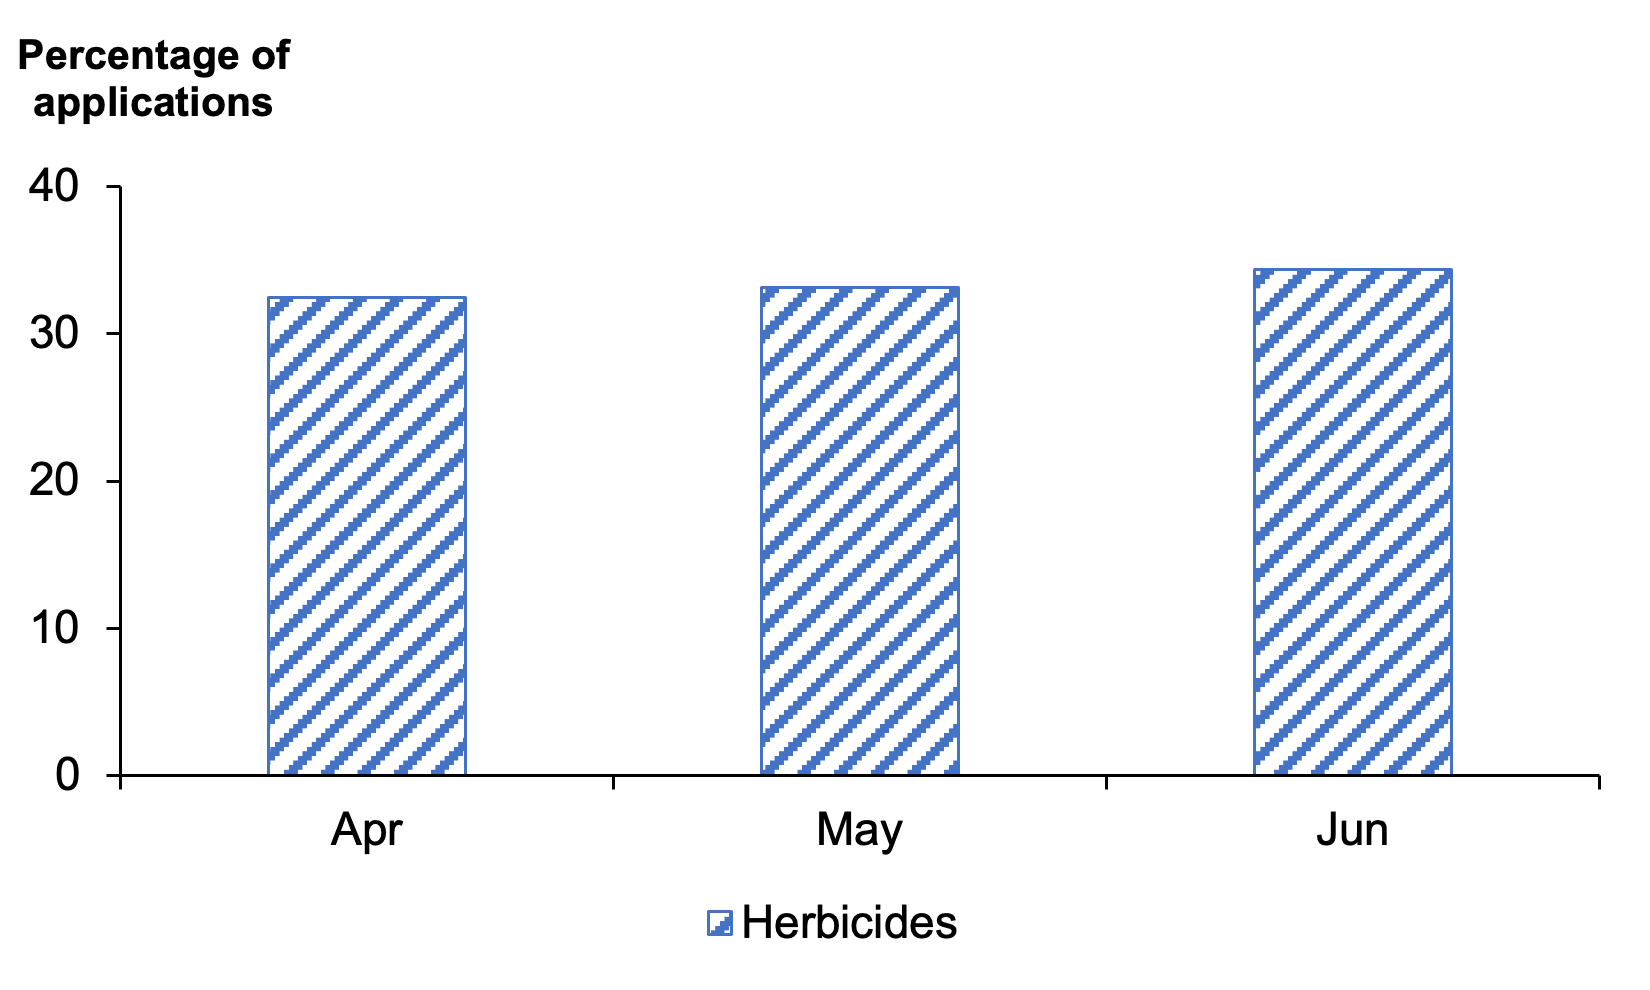 Bar chart of percentage of herbicide applications on maize by month where most applications are in June 2021.